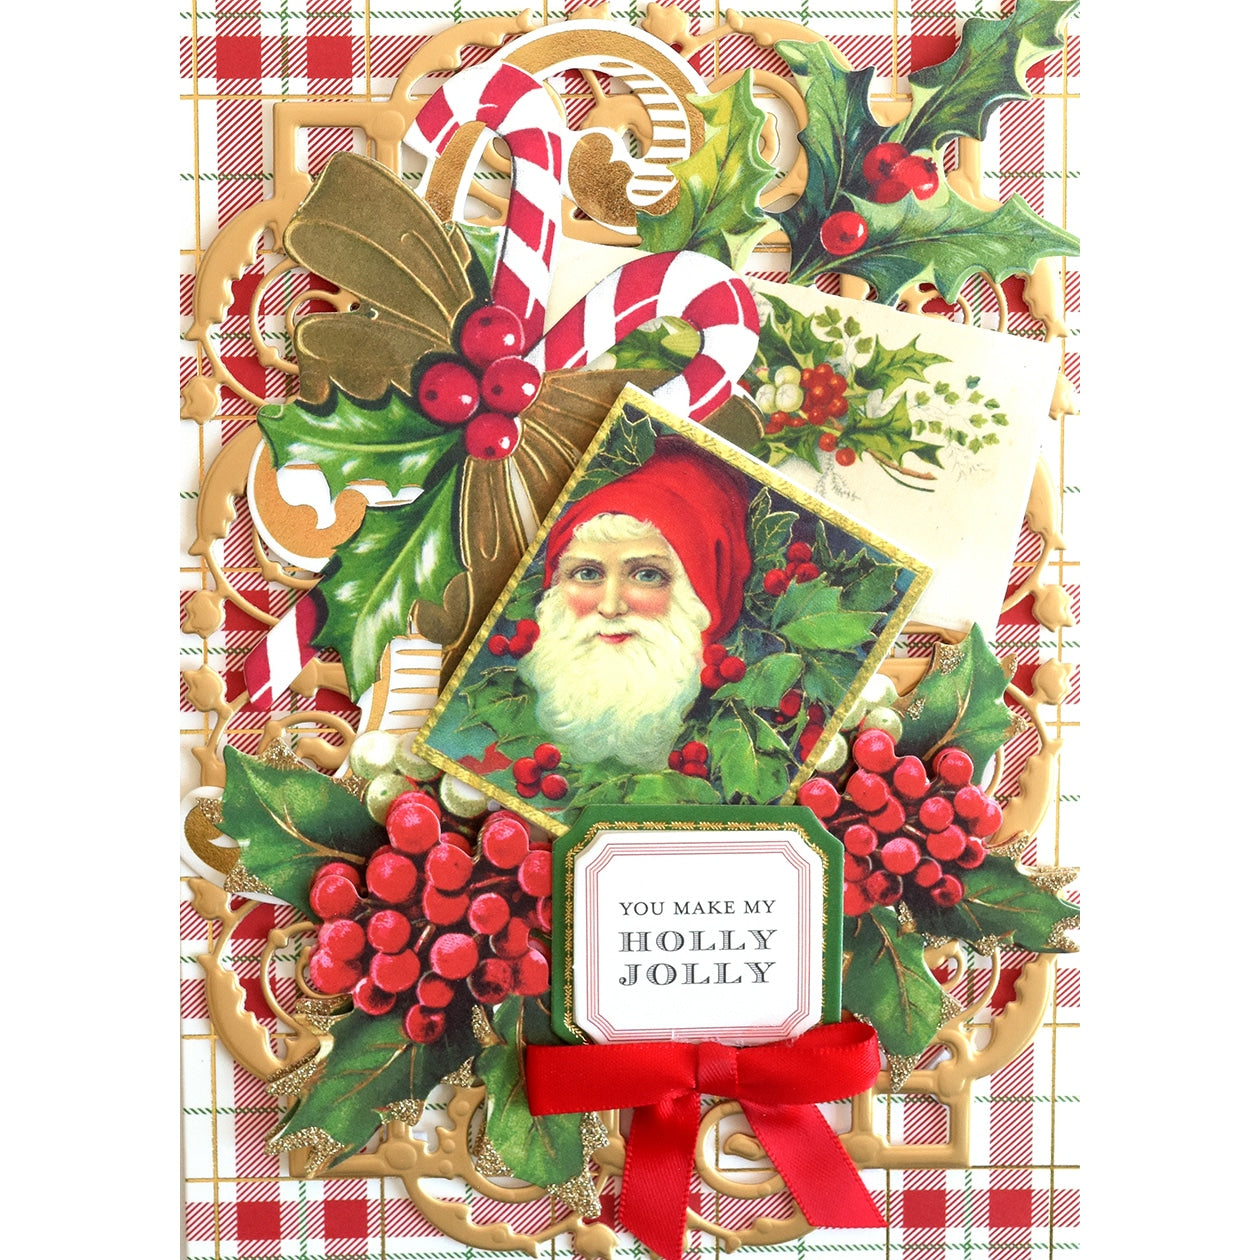 A Retro Santa Sticker Bundle with a santa clause and candy canes.